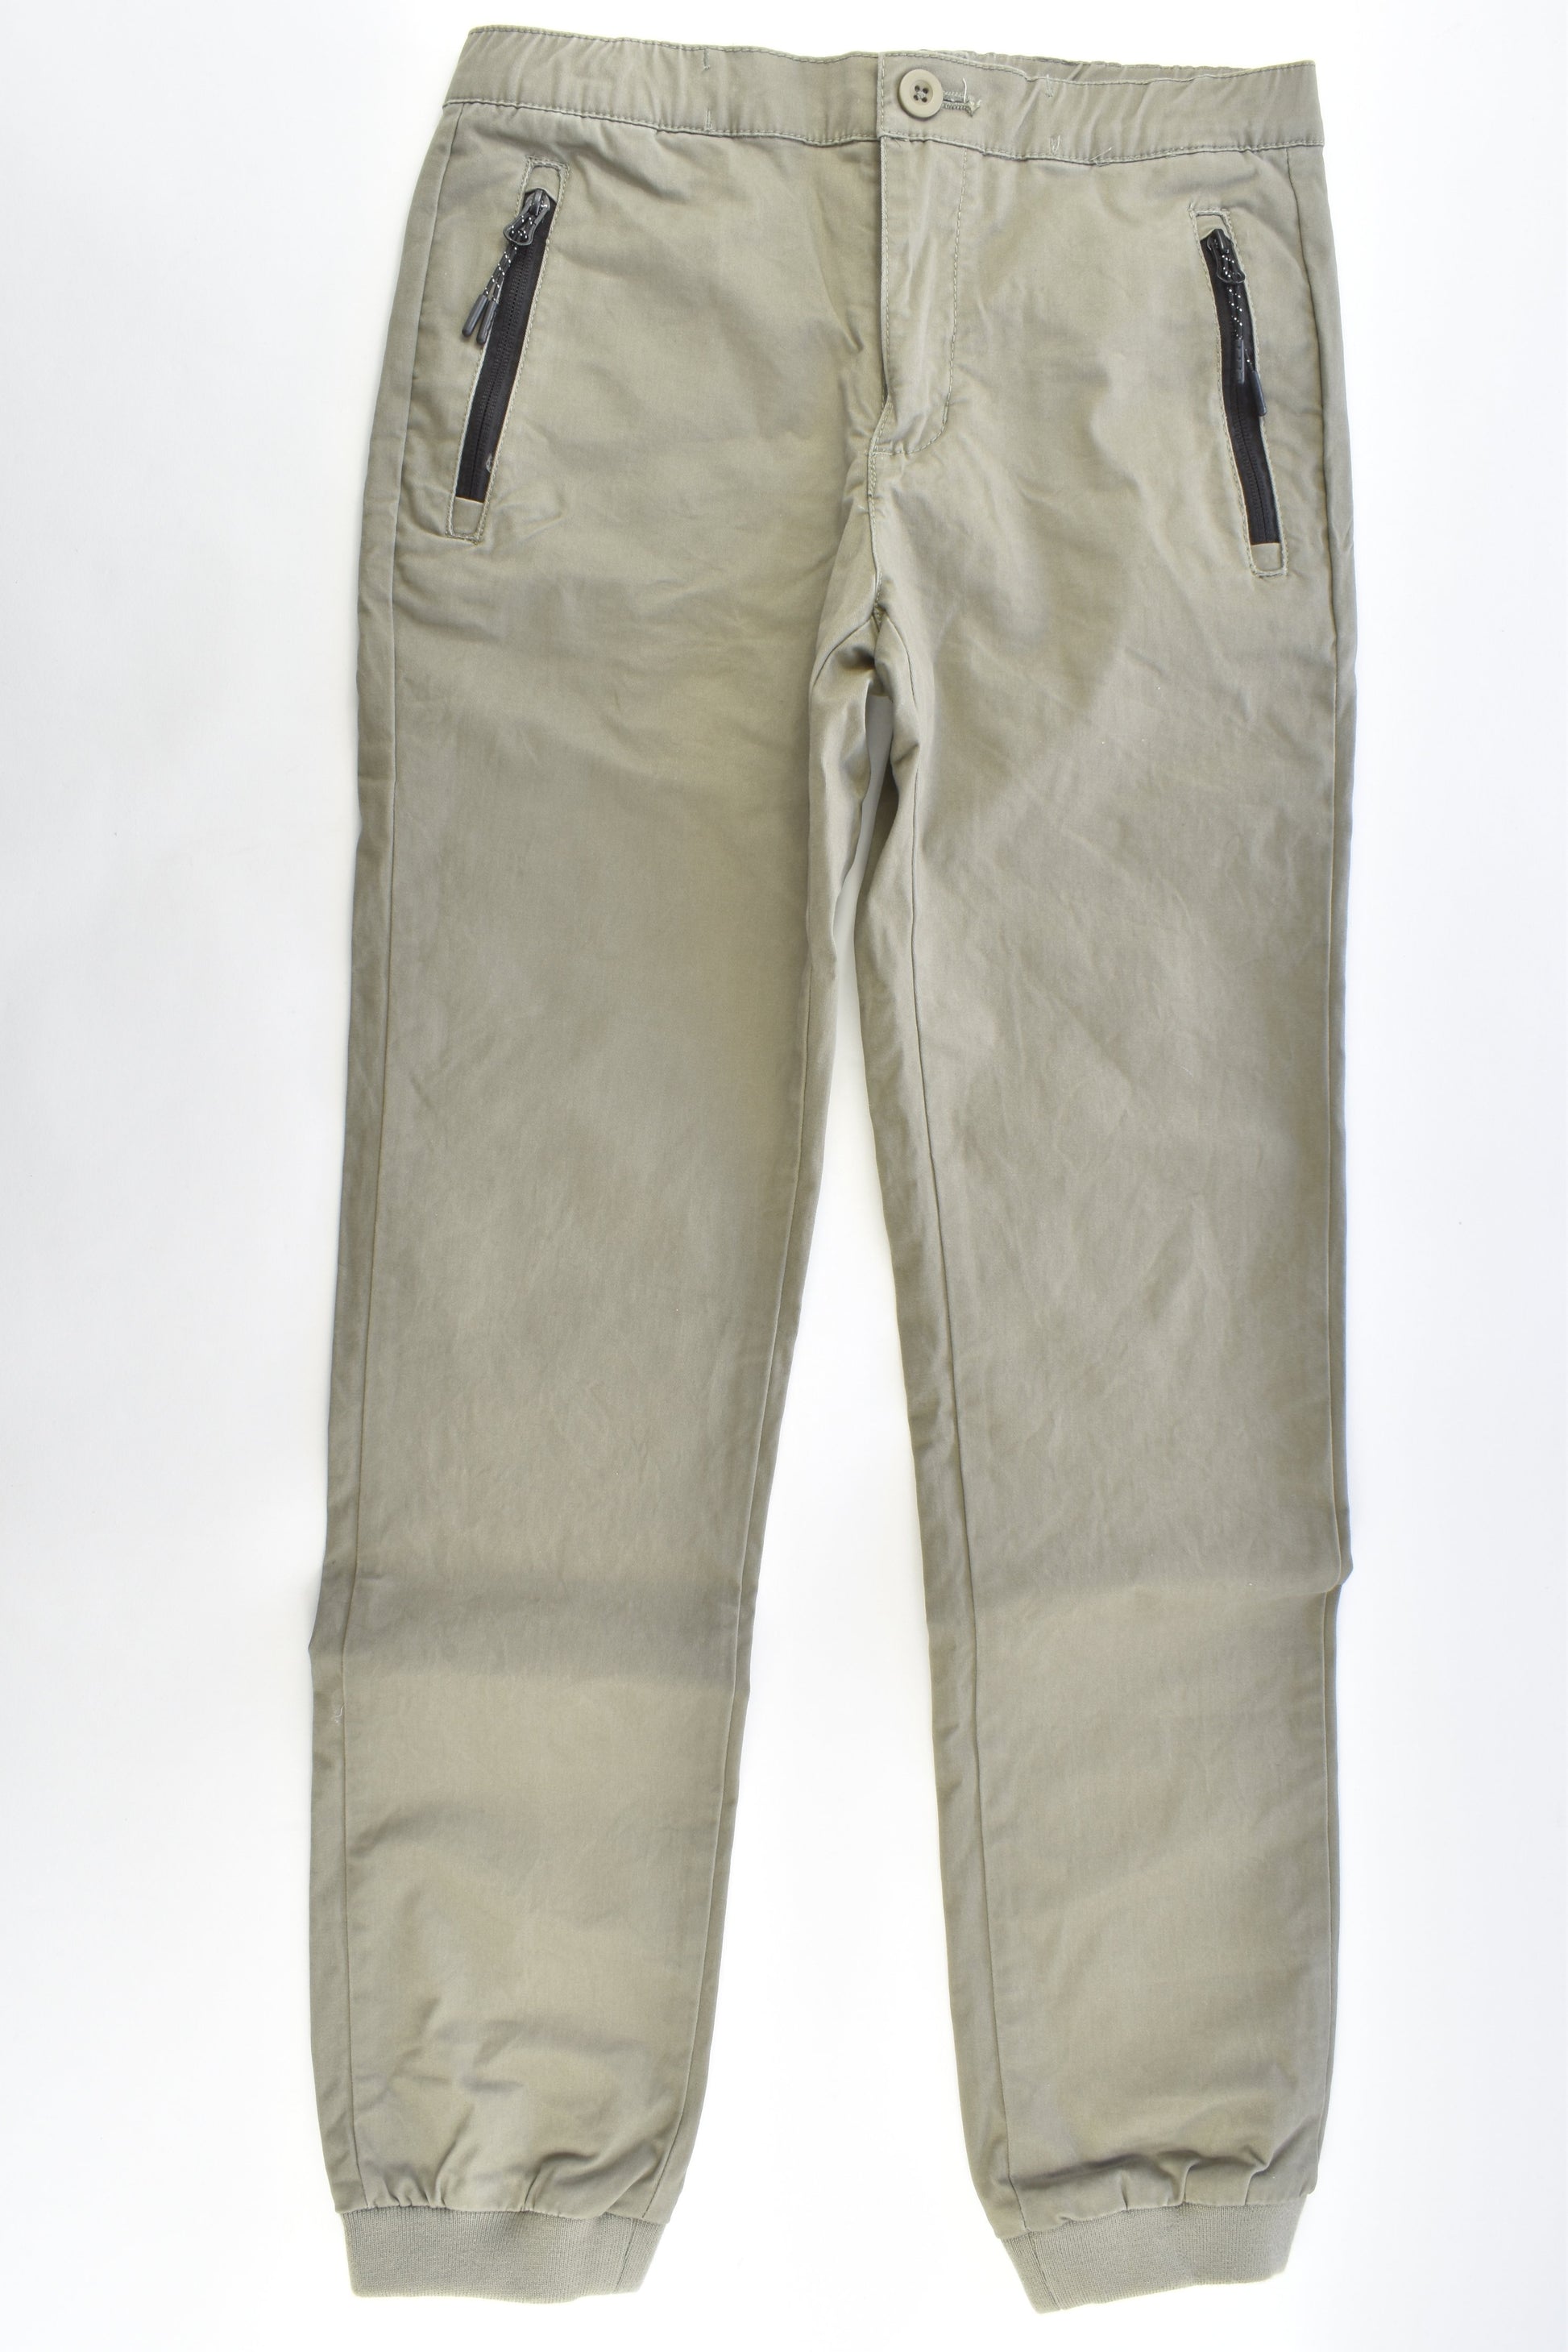 NEW Gamester Size 10-11 Stretchy Pants